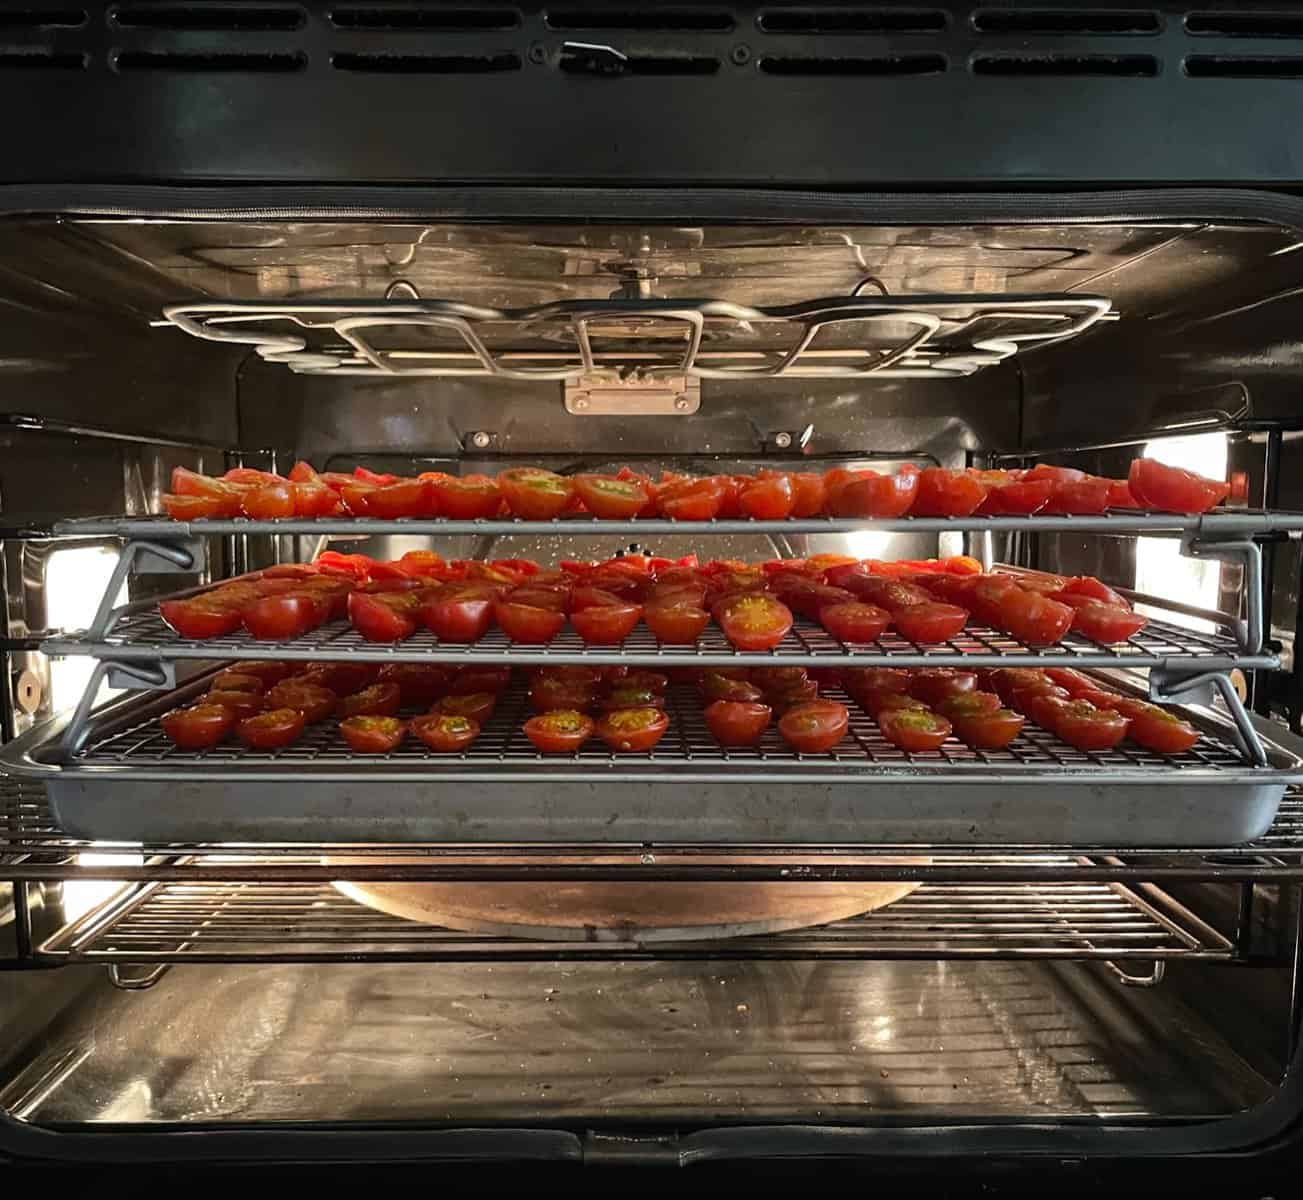 three racks of cherry tomatoes drying in an oven.